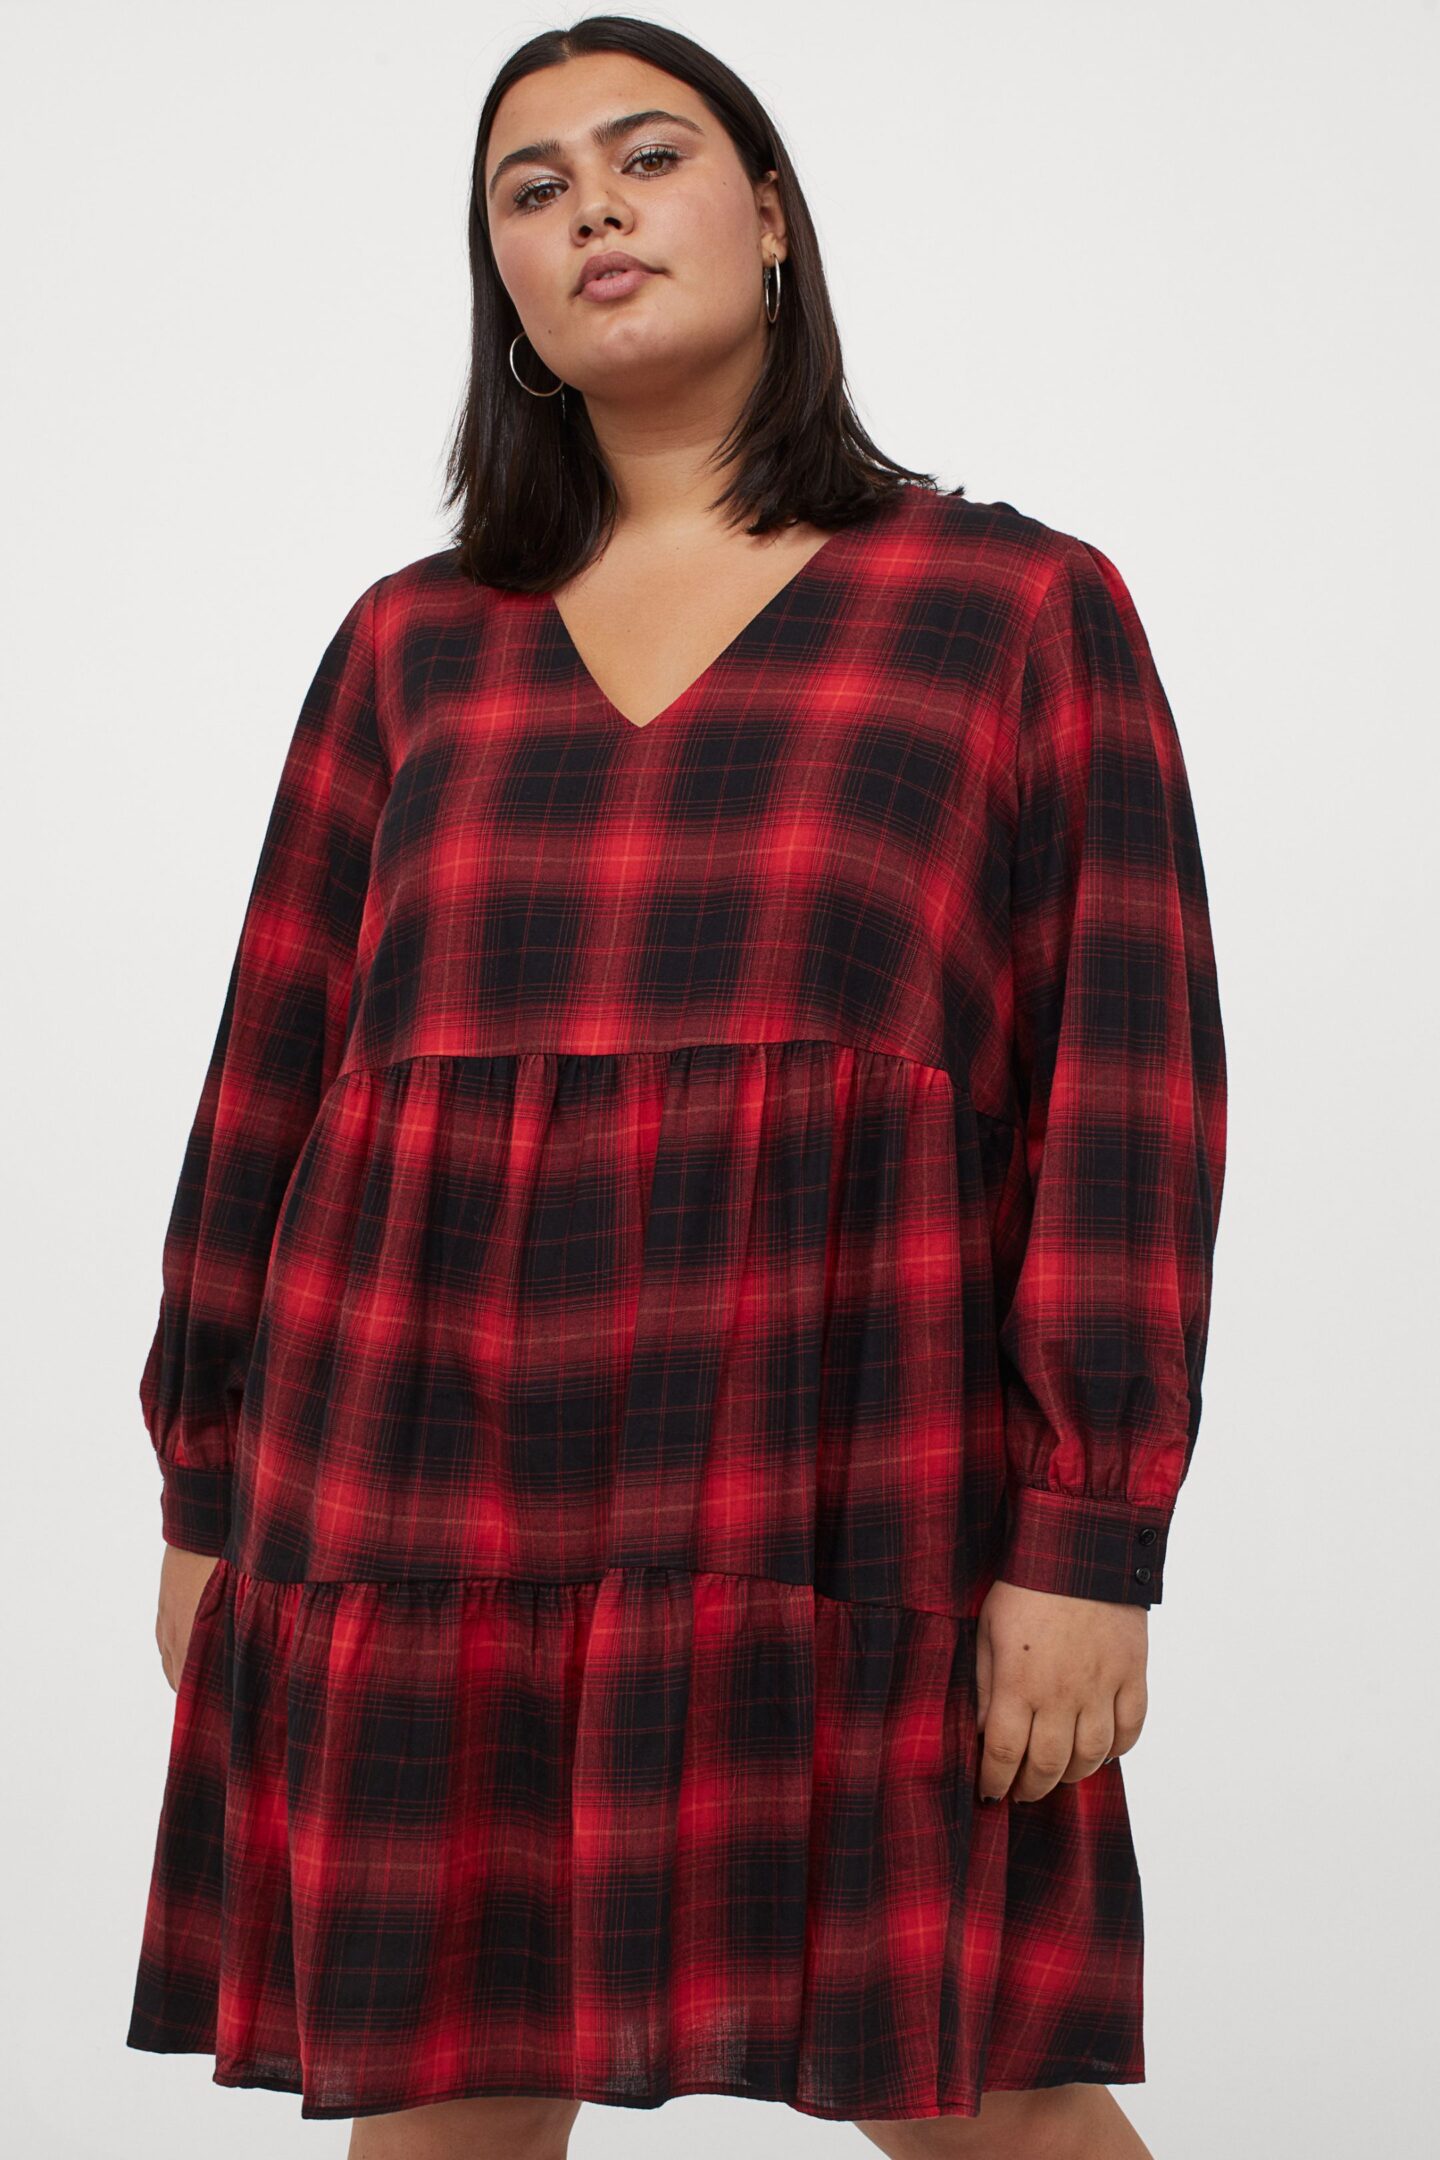 The Most Wearable Fall Fashion Trends of 2020 In Plus Size